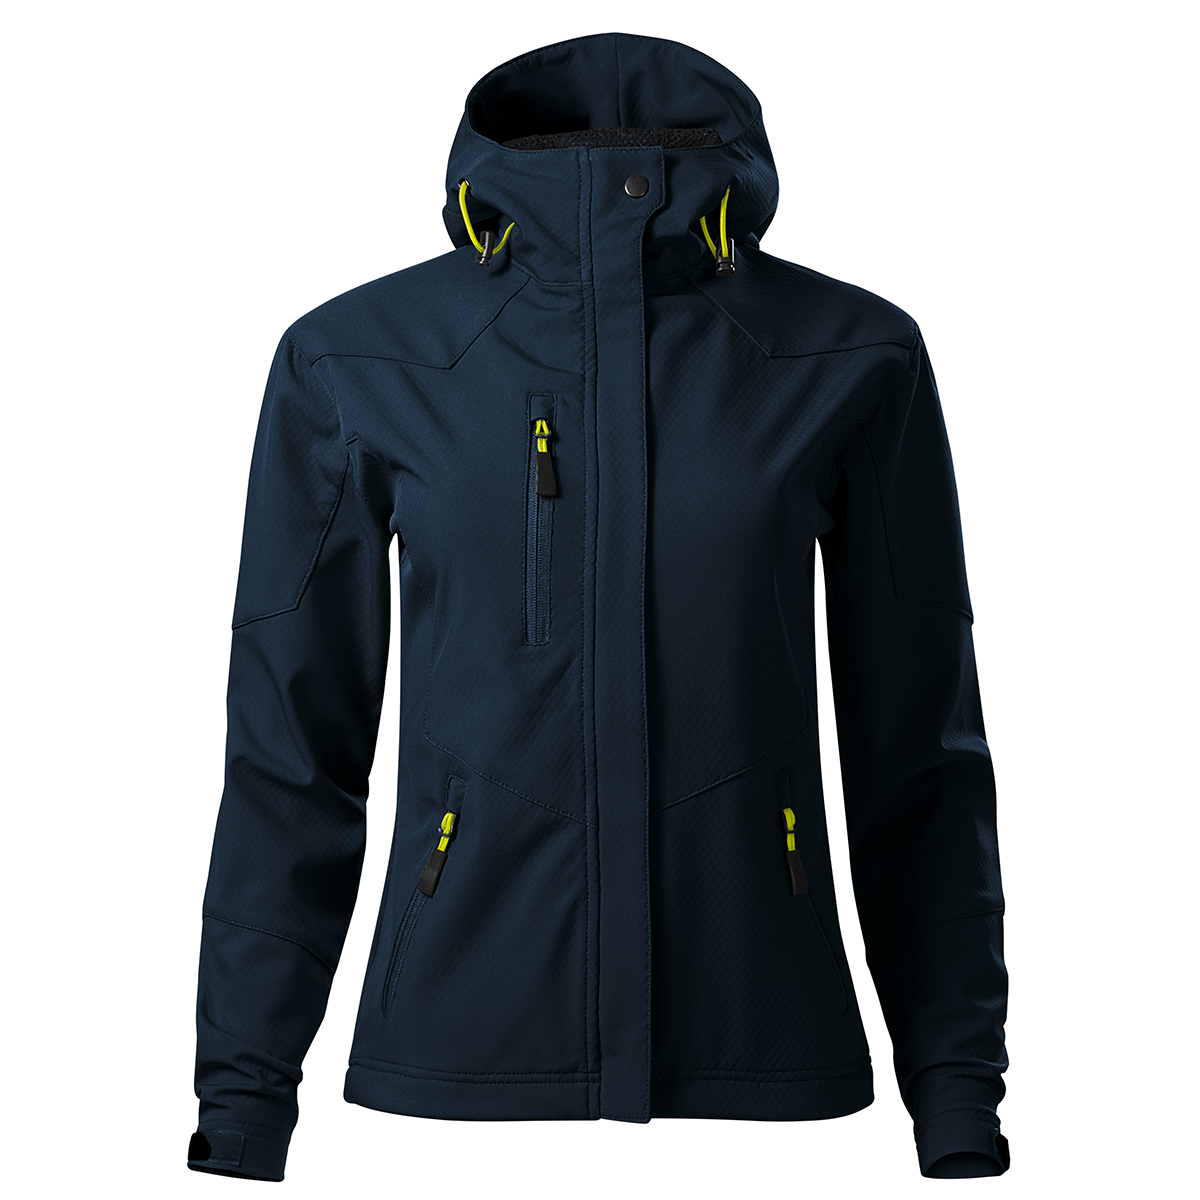 Women's red softshell jacket 